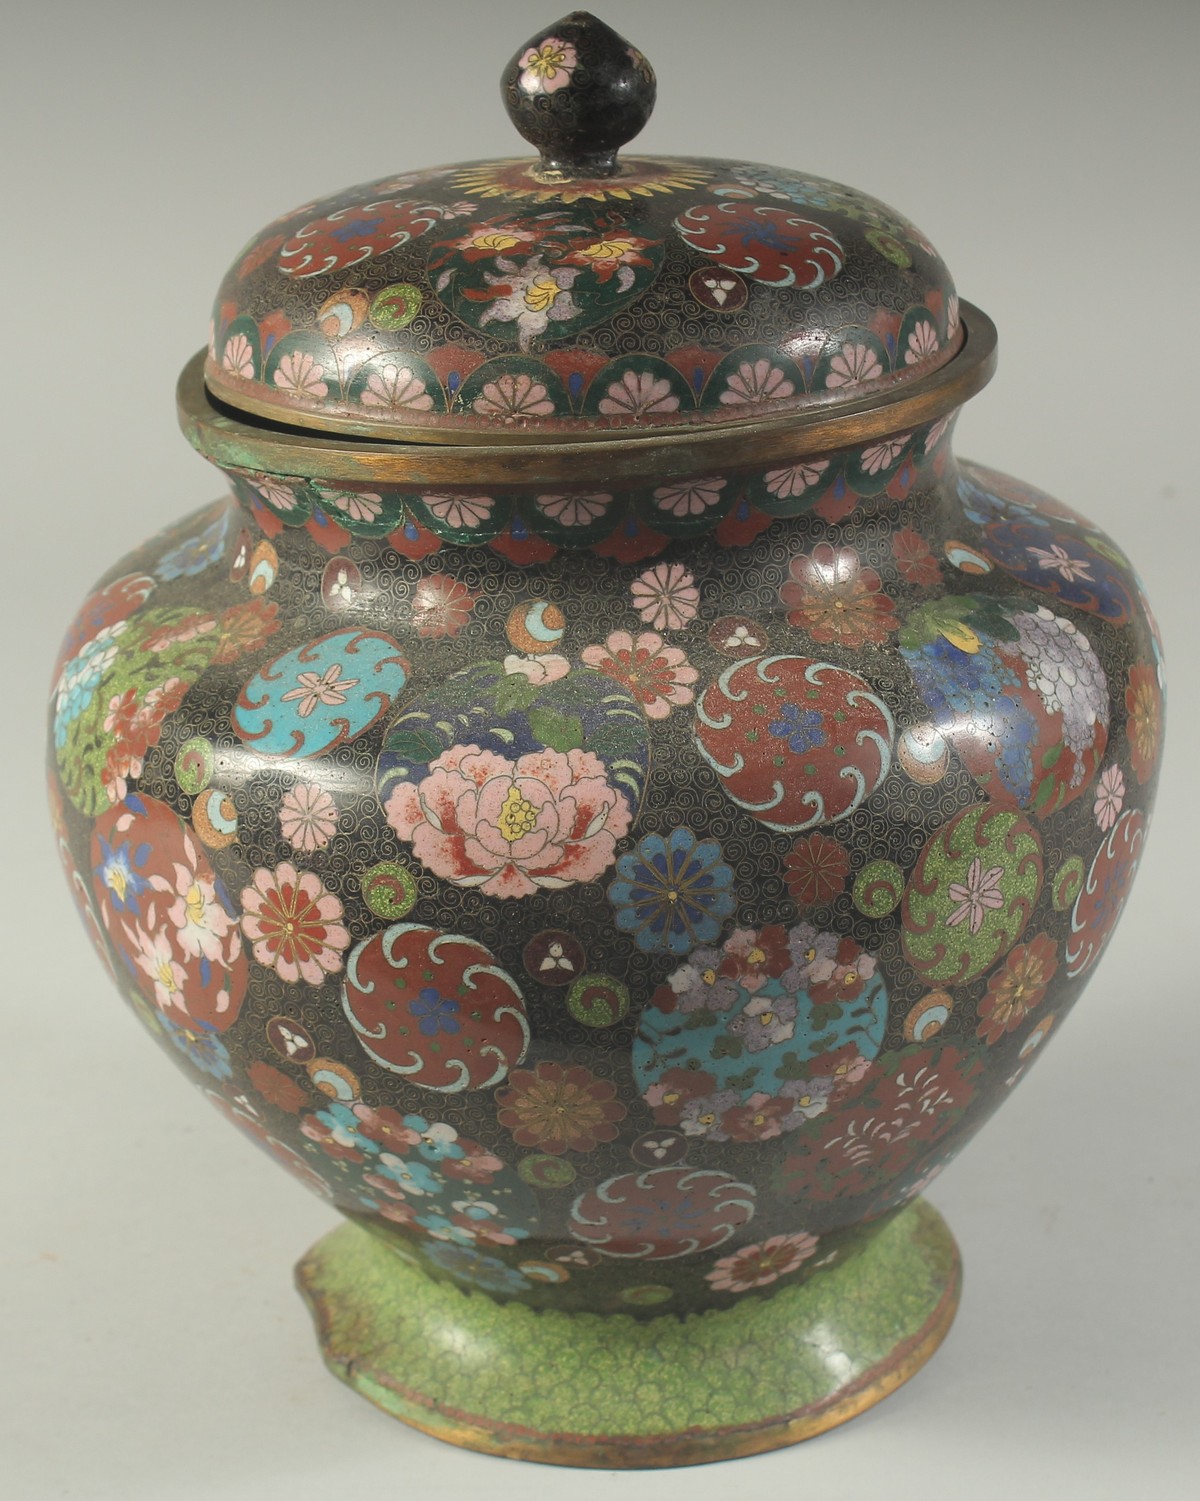 A LARGE JAPANESE BLACK GROUND CLOISONNE JAR AND COVER, with decorative floral roundels, 27cm high. - Image 3 of 7